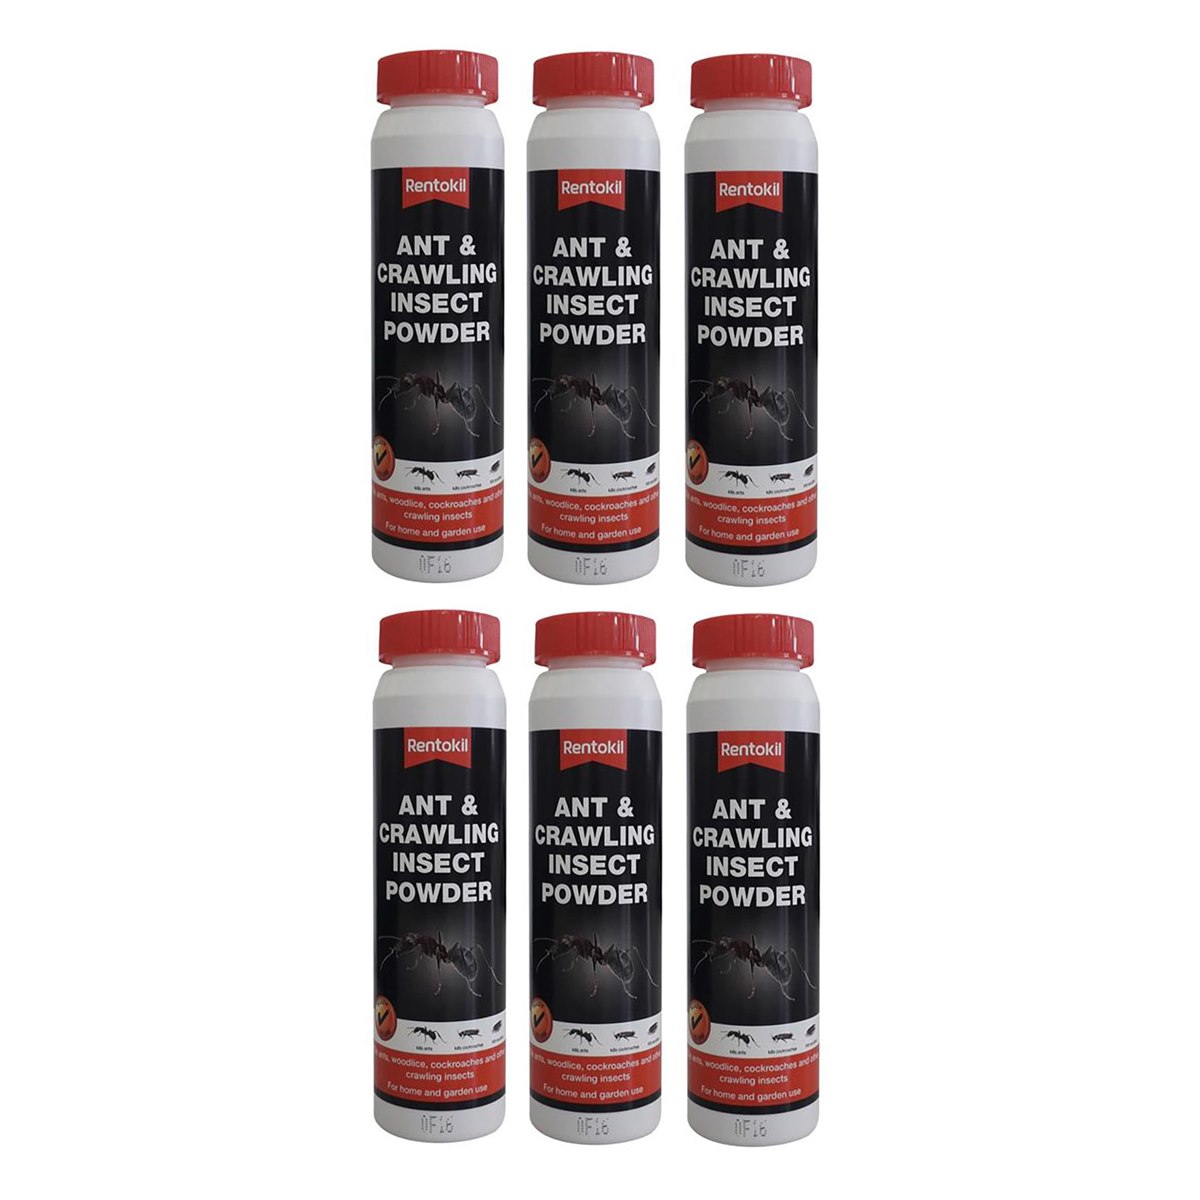 Case of 6 x Rentokil Ant & Crawling Insect Powder 150g